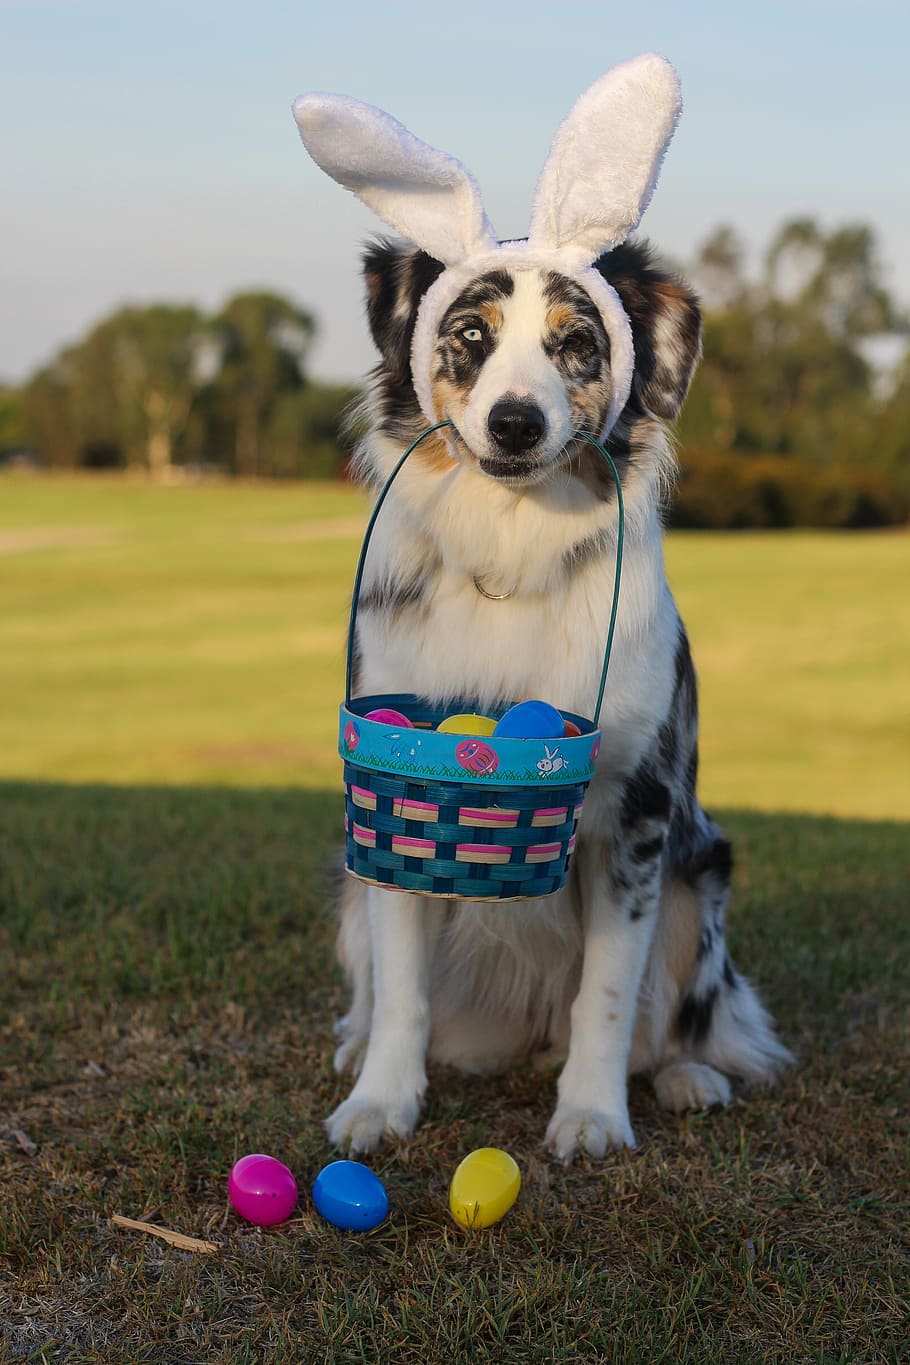 HD wallpaper: white, brown, and black dog carrying Easter basket